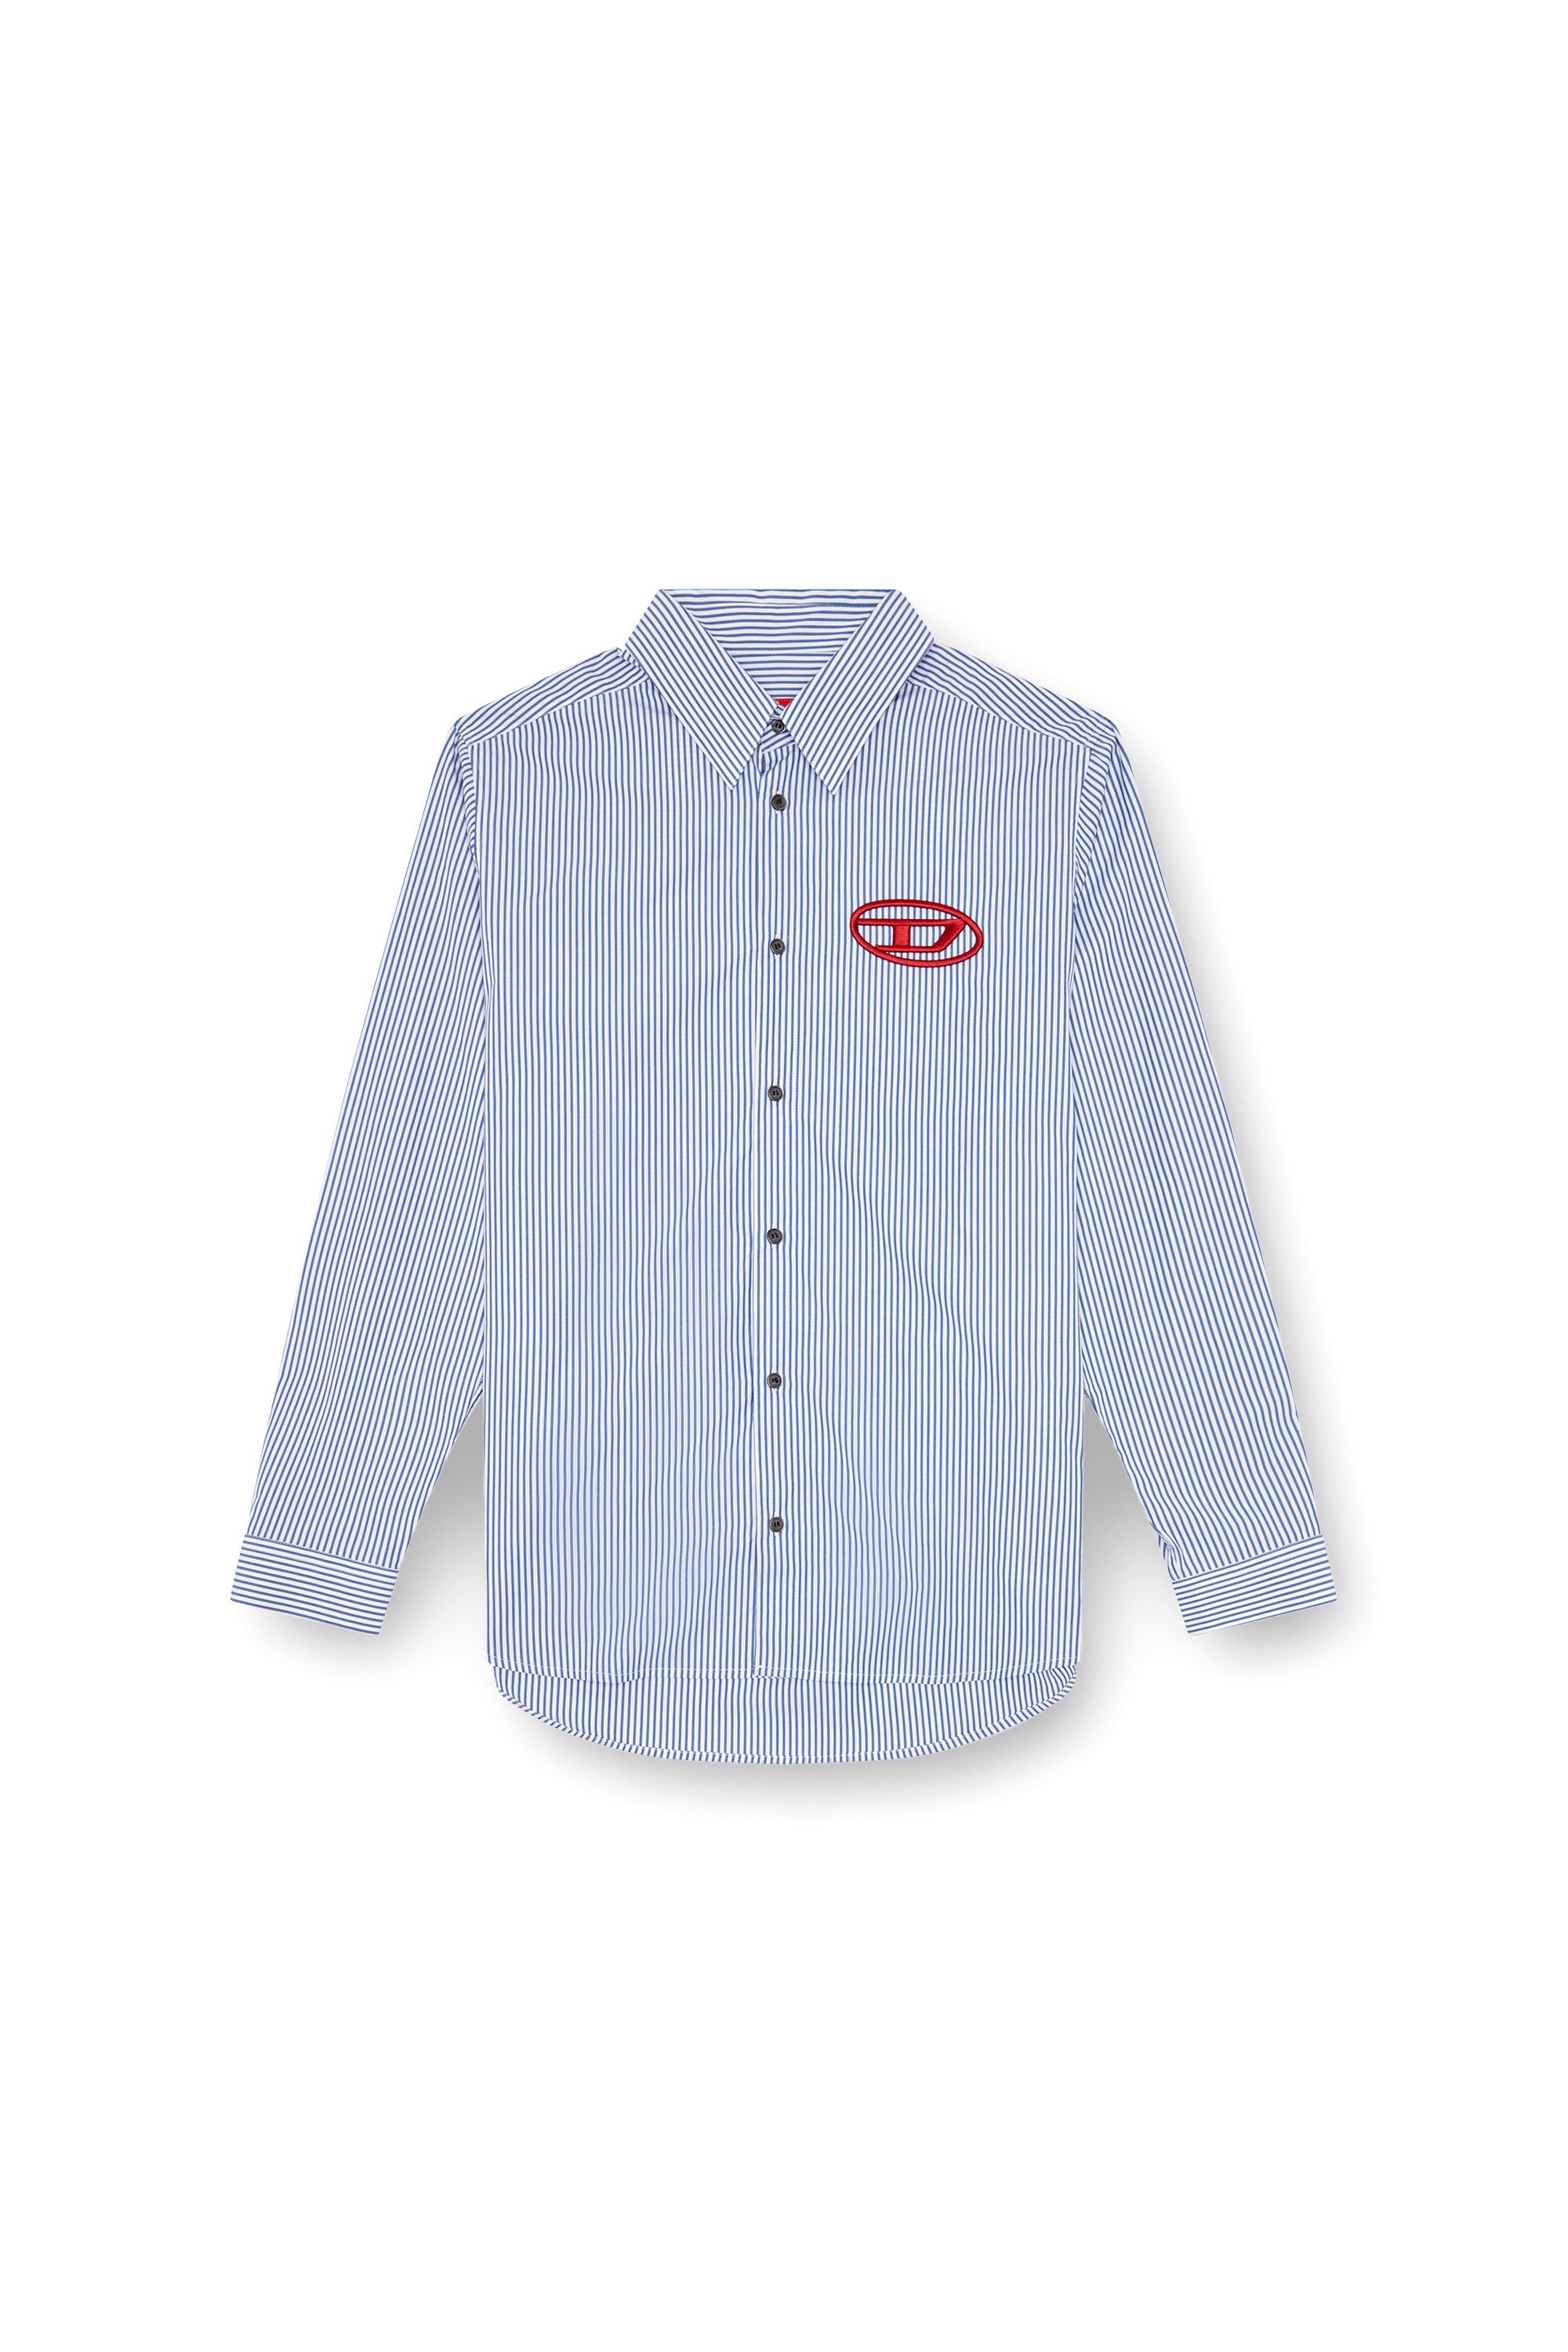 Diesel - S-SIMPLY-E, Homme Chemise rayée avec broderie Oval D in Bleu - Image 3